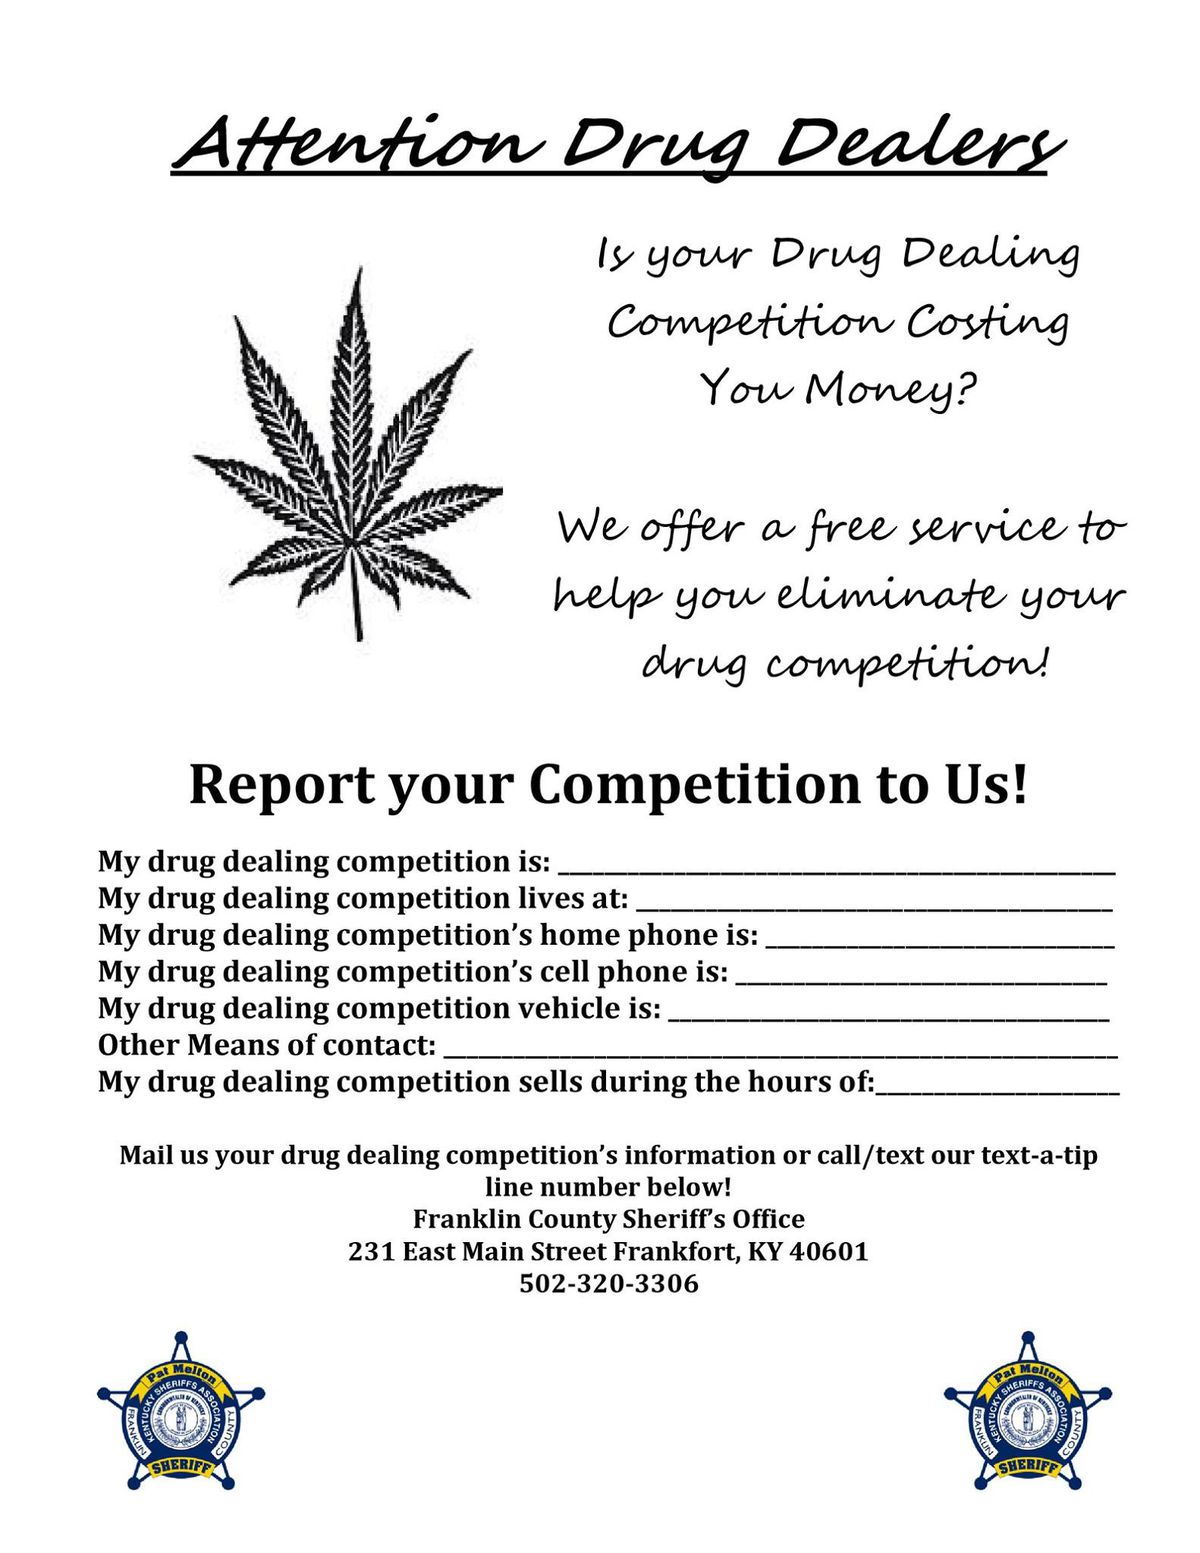 A form that lets drug dealers snitch on their competition.